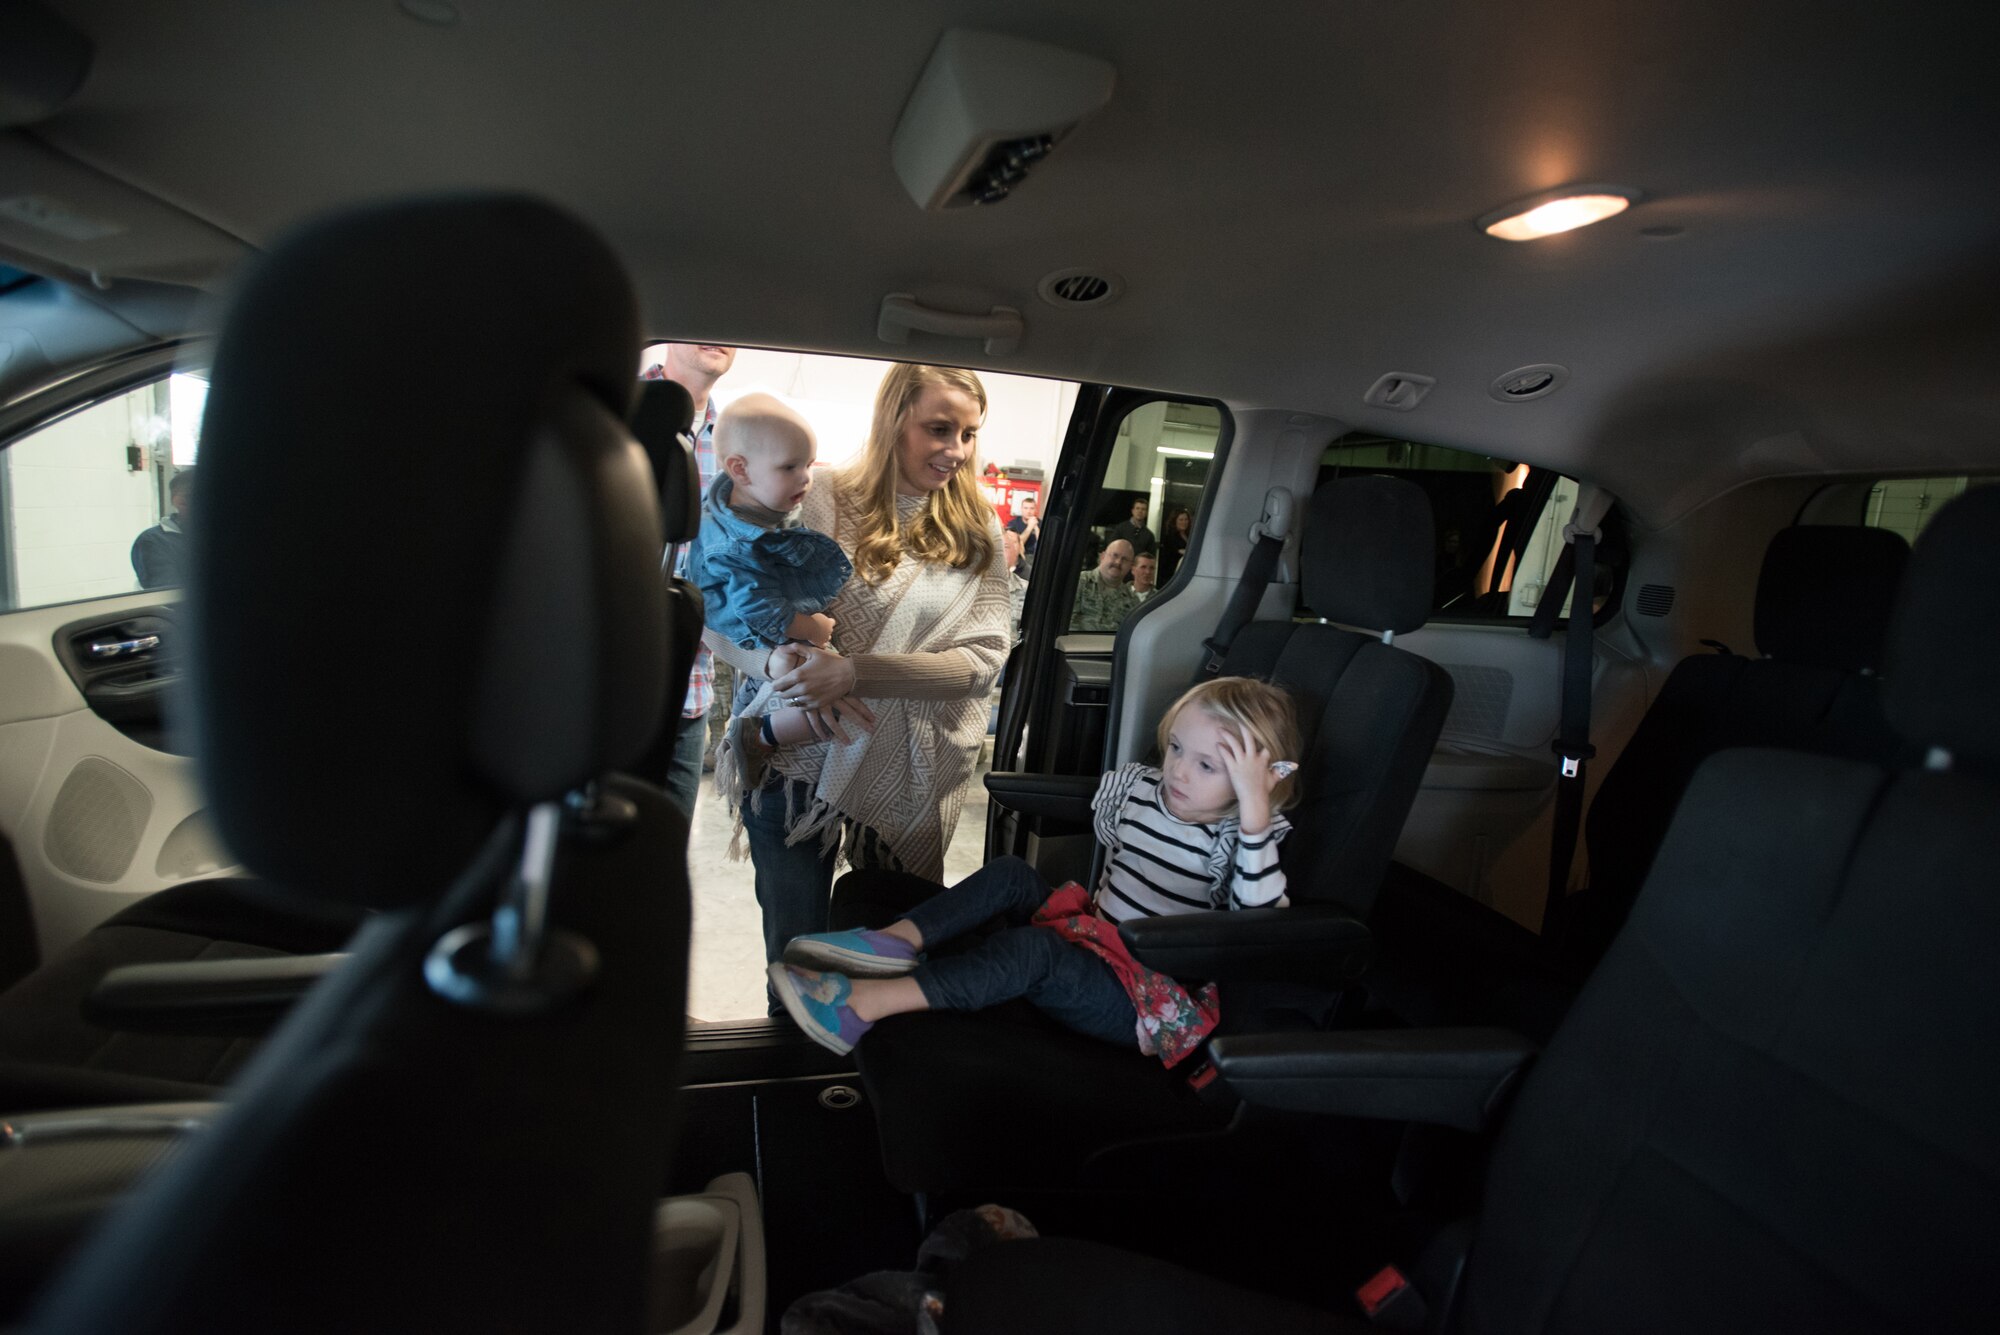 Amanda Goodlin, wife of the Kentucky Air National Guard’s Staff Sgt. Neil Goodlin, inspects the family’s new minivan with her son, Dash, and daughter, Ava, at Oxmoor Collision Center in Louisville, Ky., Nov. 20, 2015. The van was donated to the Goodlins as part of the National Auto Body Council’s “Recycled Rides” program, which restores wrecked vehicles to like-new condition before giving them to needy individuals. (U.S. Air National Guard photo by Maj. Dale Greer)